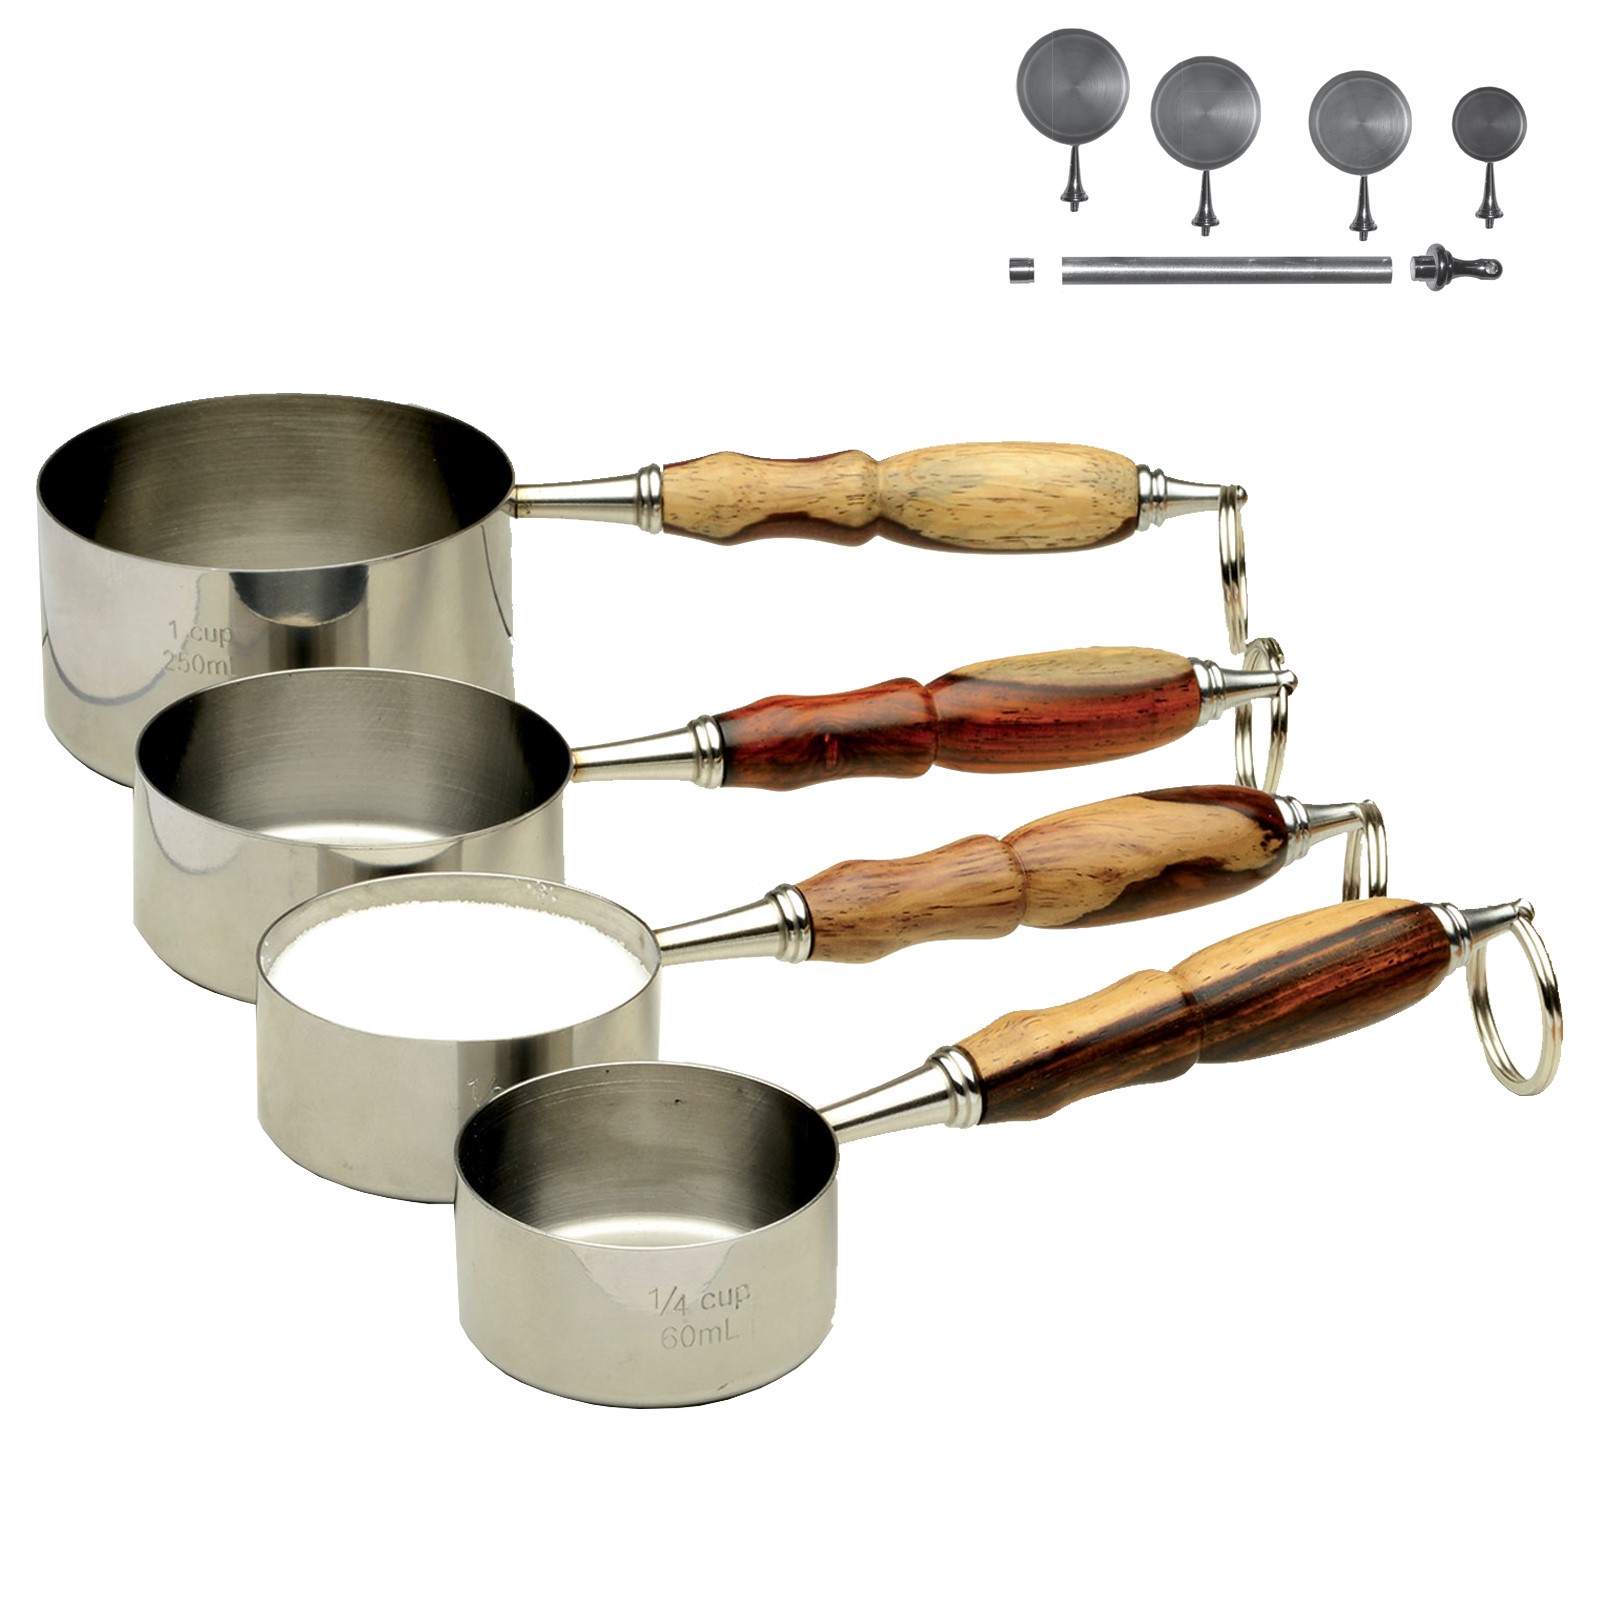 Stainless Steel 4-pc Measuring Cup Set, Accessories: National